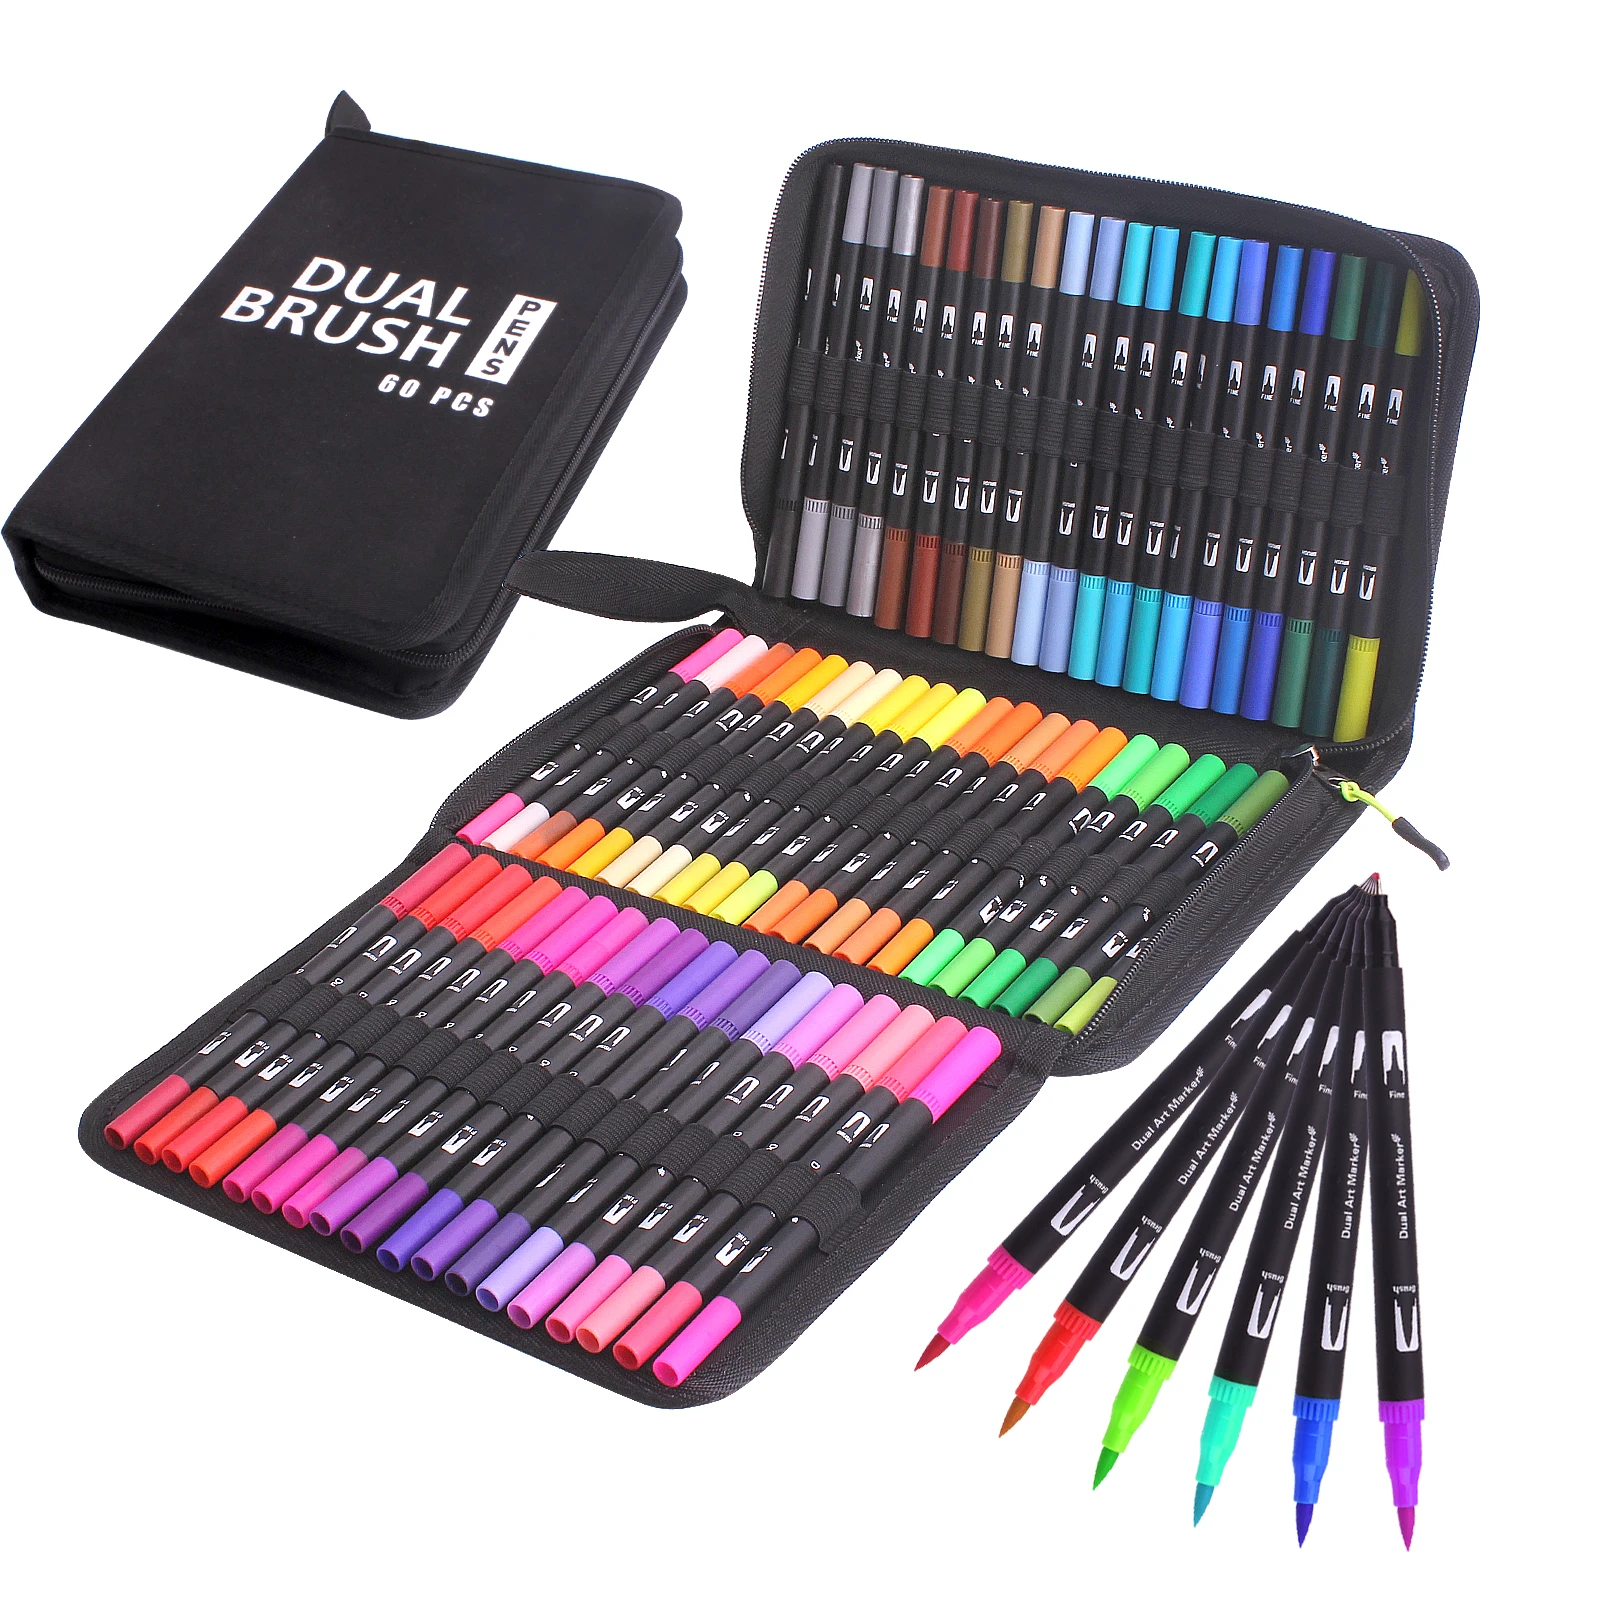 60 Colors Art Pens Set, Fine Tip & Flexible Brush Pen Tip, Water Based Markers for Adult Coloring Calligraphy